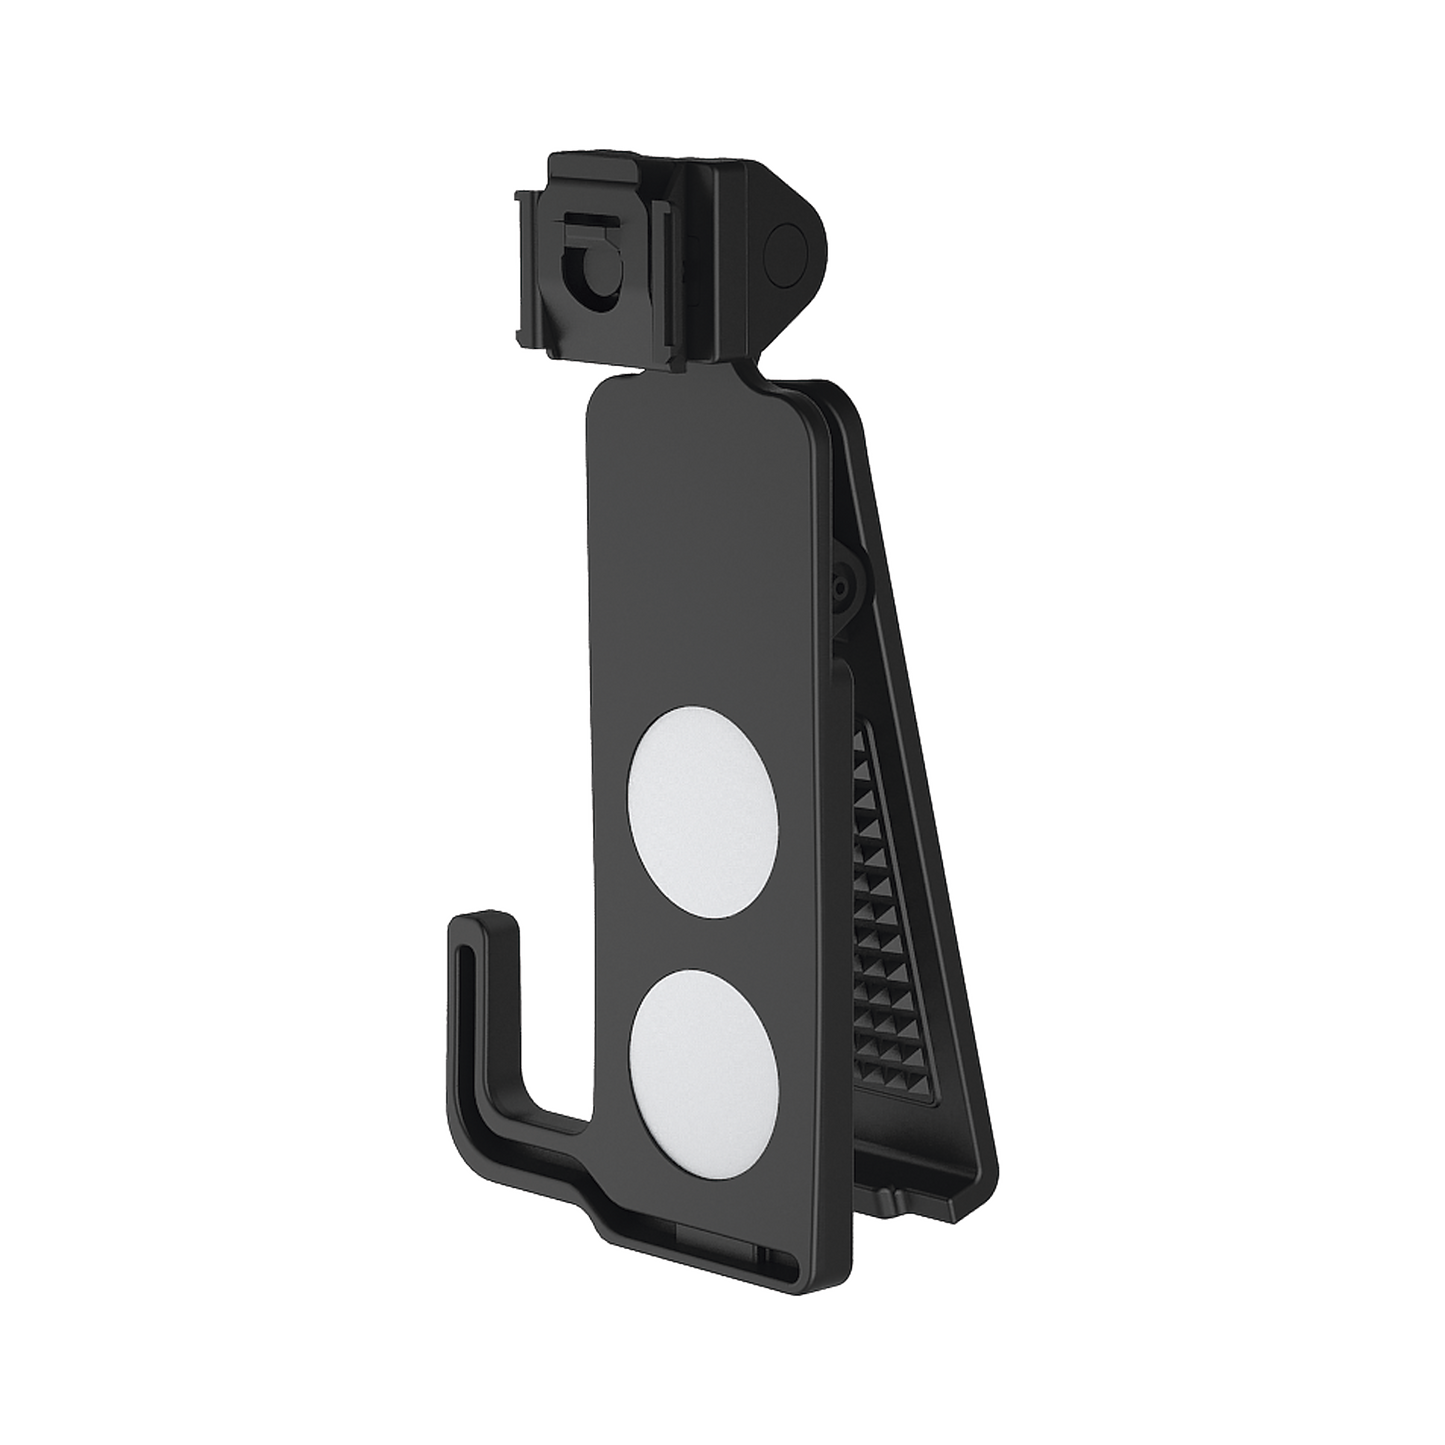 Clip para Body Cam / Compatible con Serie DS-MH2311 - DS-MCW405 - DS-MCW407